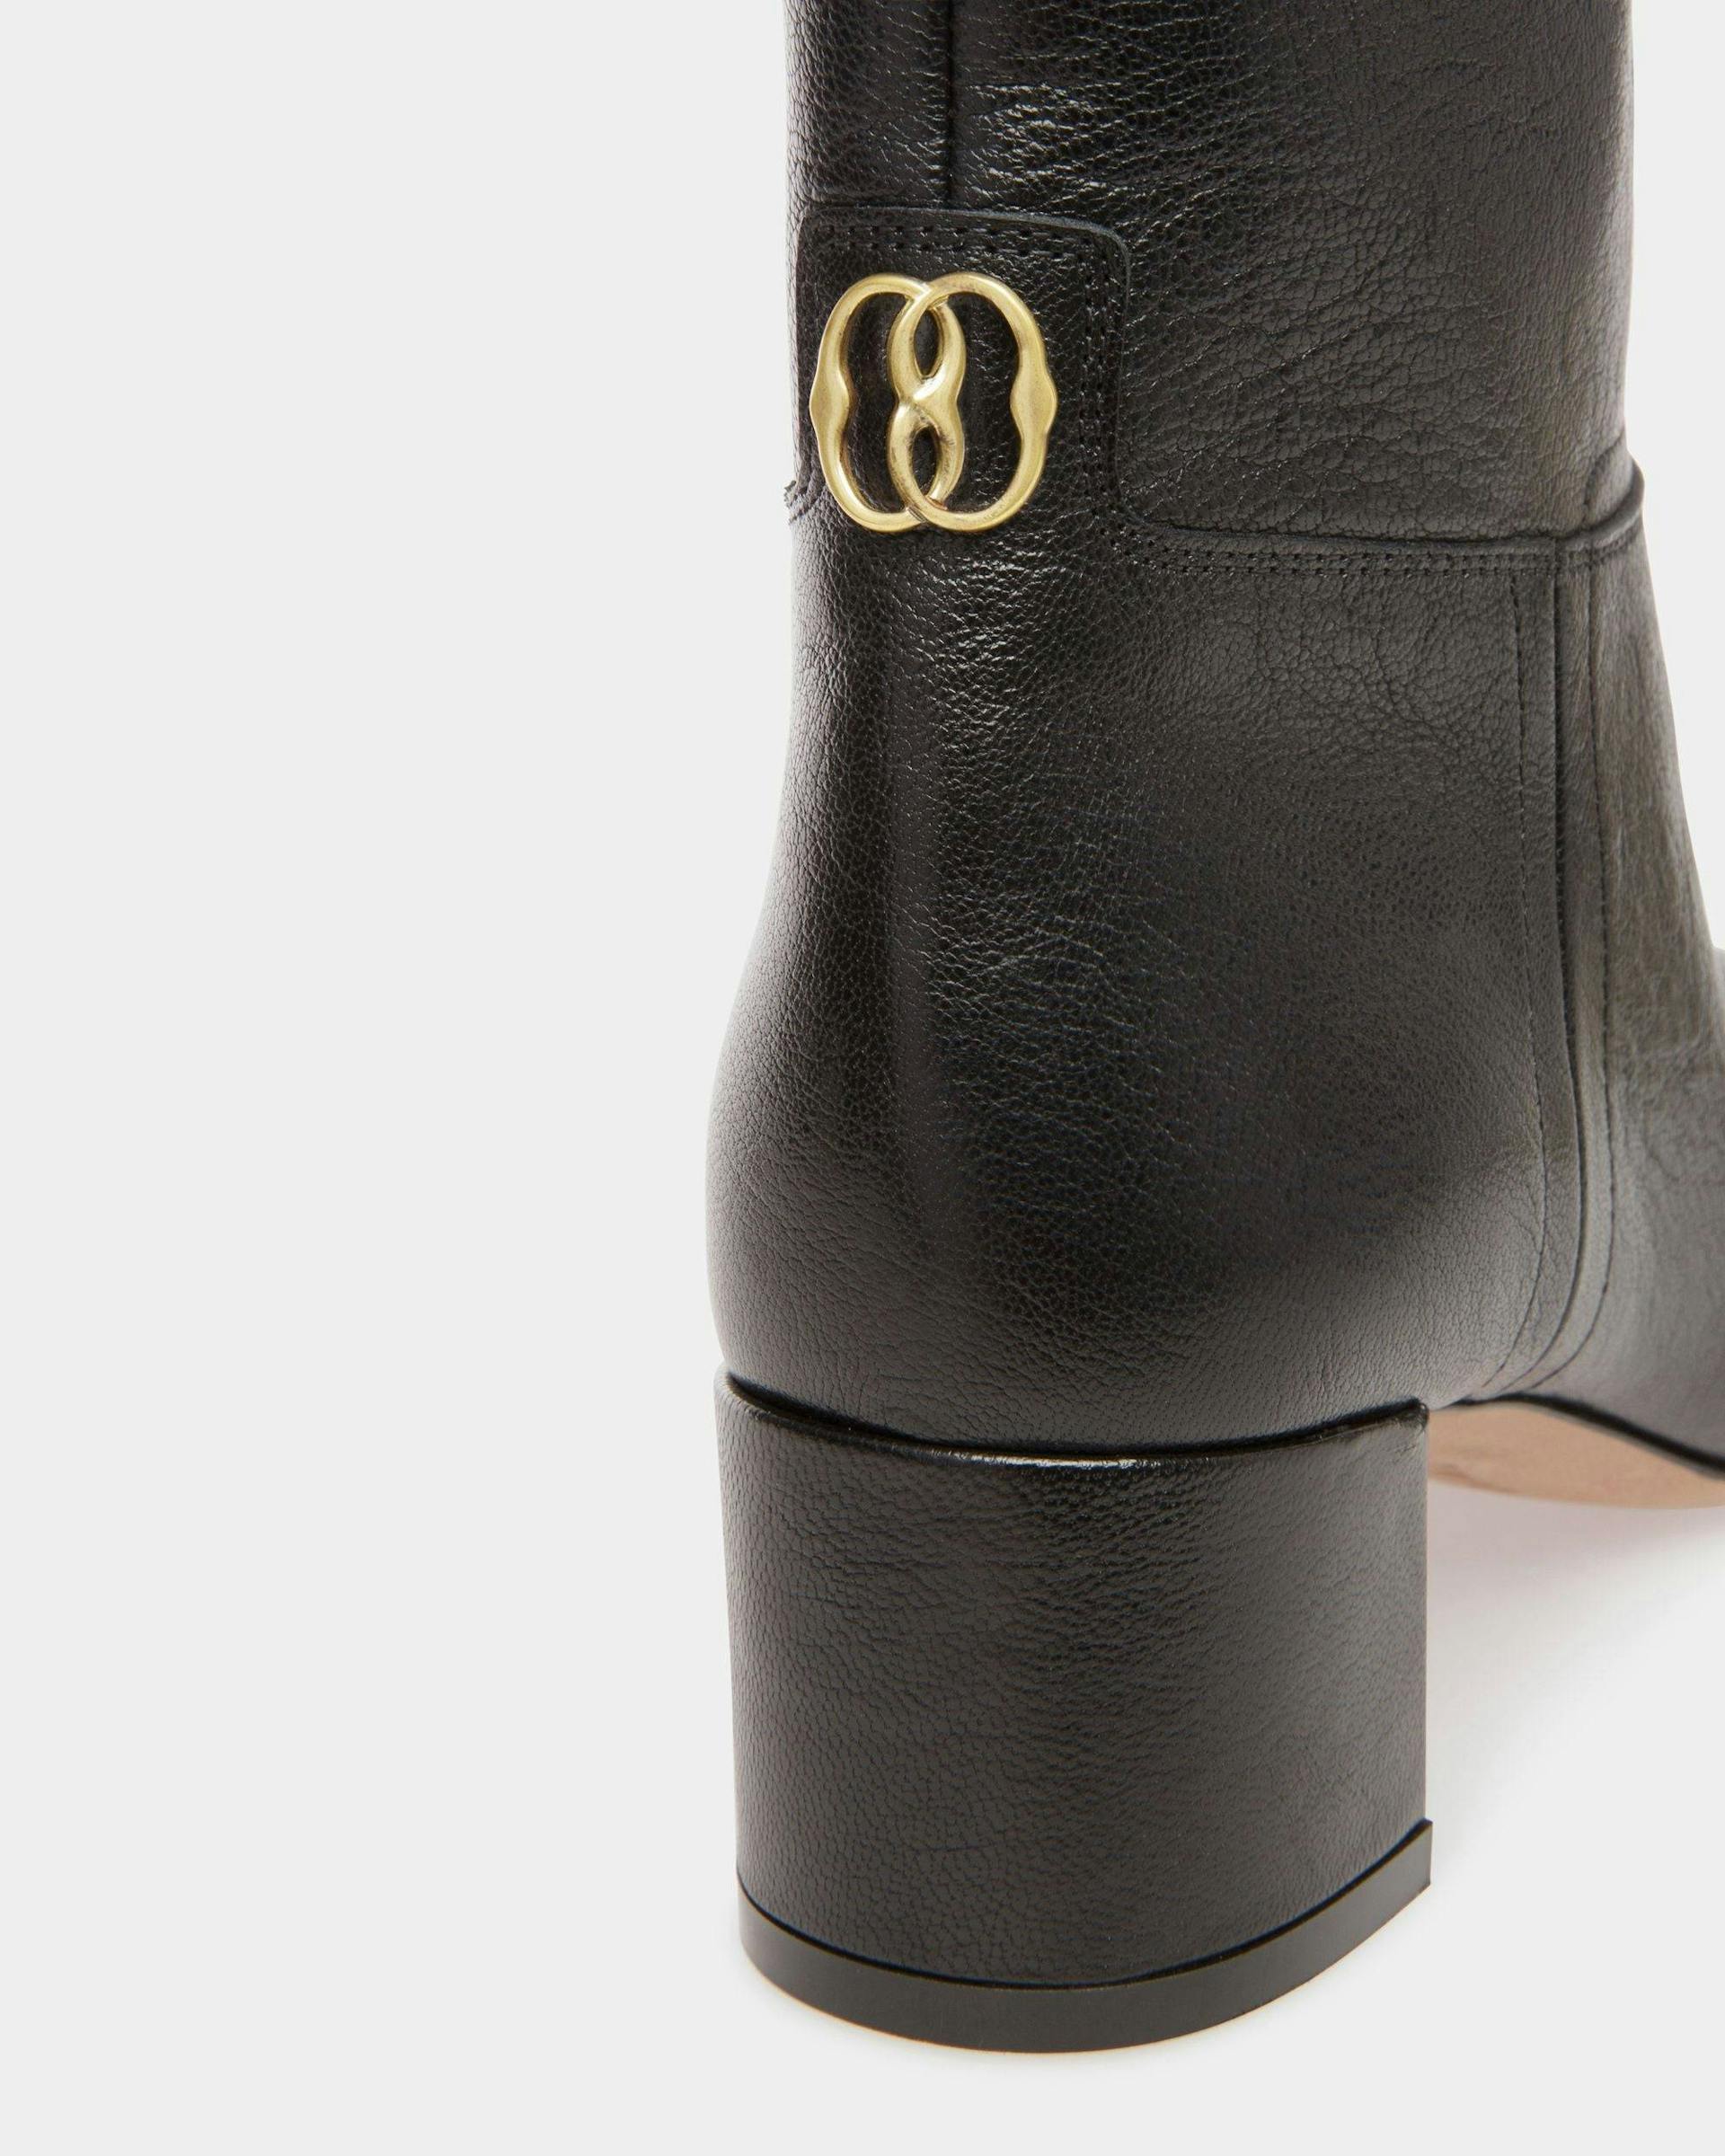 Women's Daily Emblem Booties In Black Leather | Bally | Still Life Detail